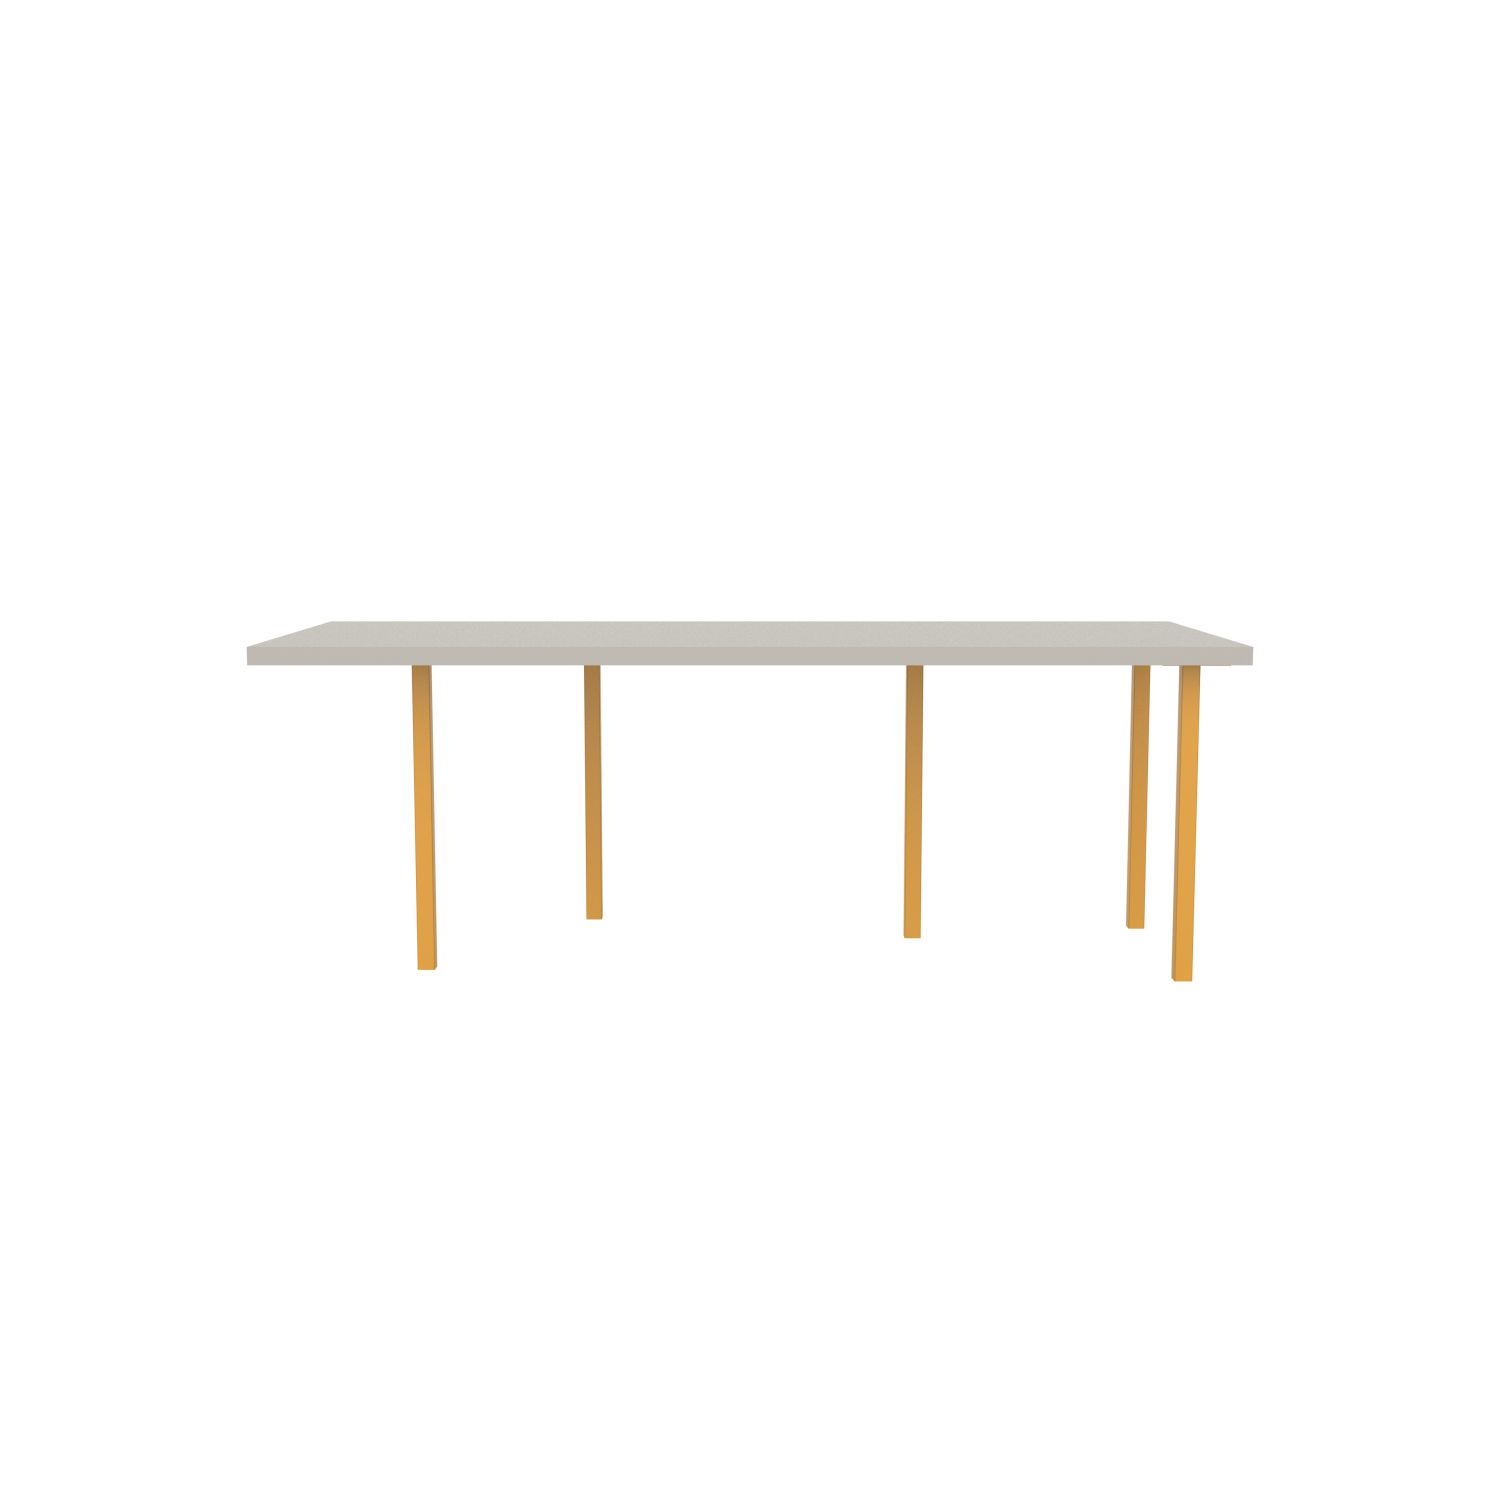 lensvelt bbrand table five fixed heigt 915x218 hpl white 50 mm price level 1 yellow ral1004